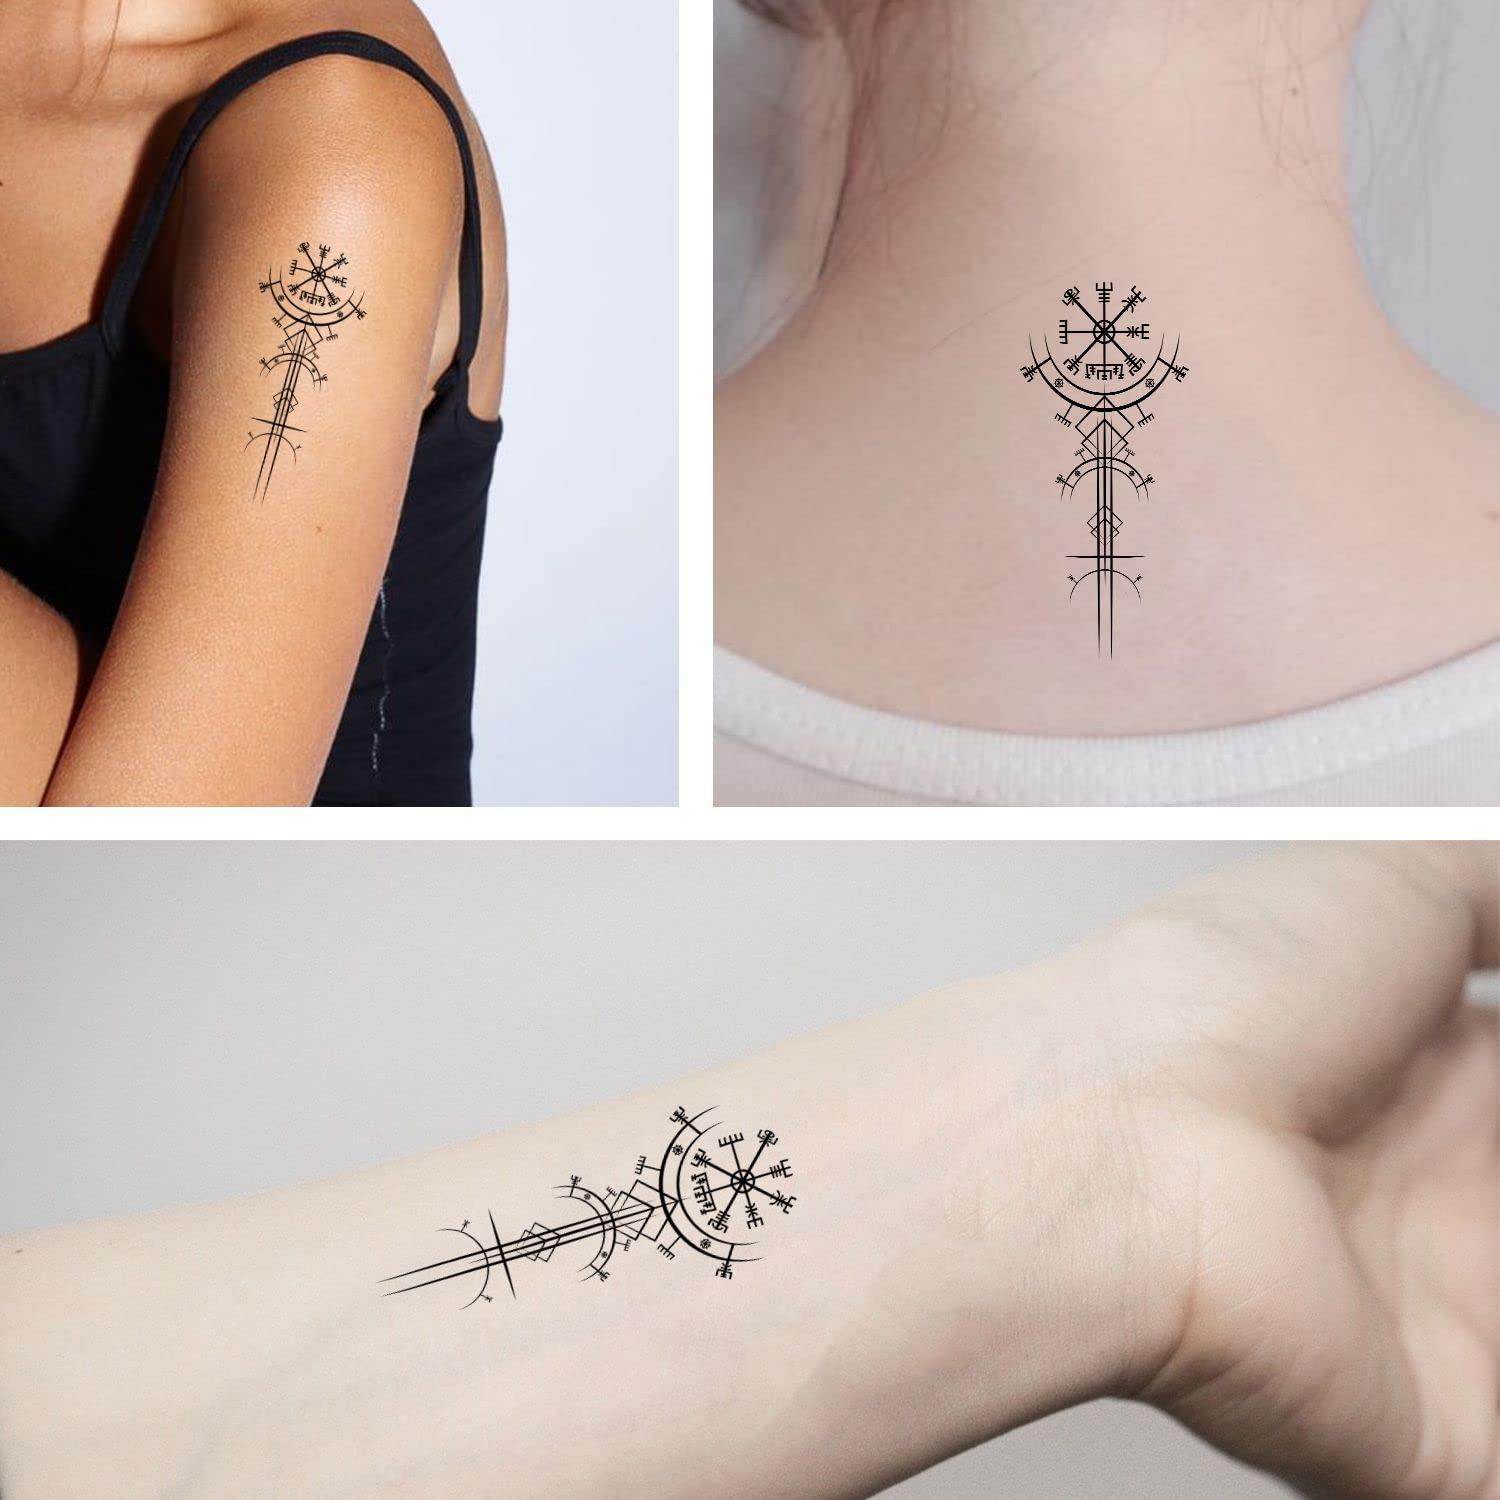 Tattoo of a compass located on the back of the neck.